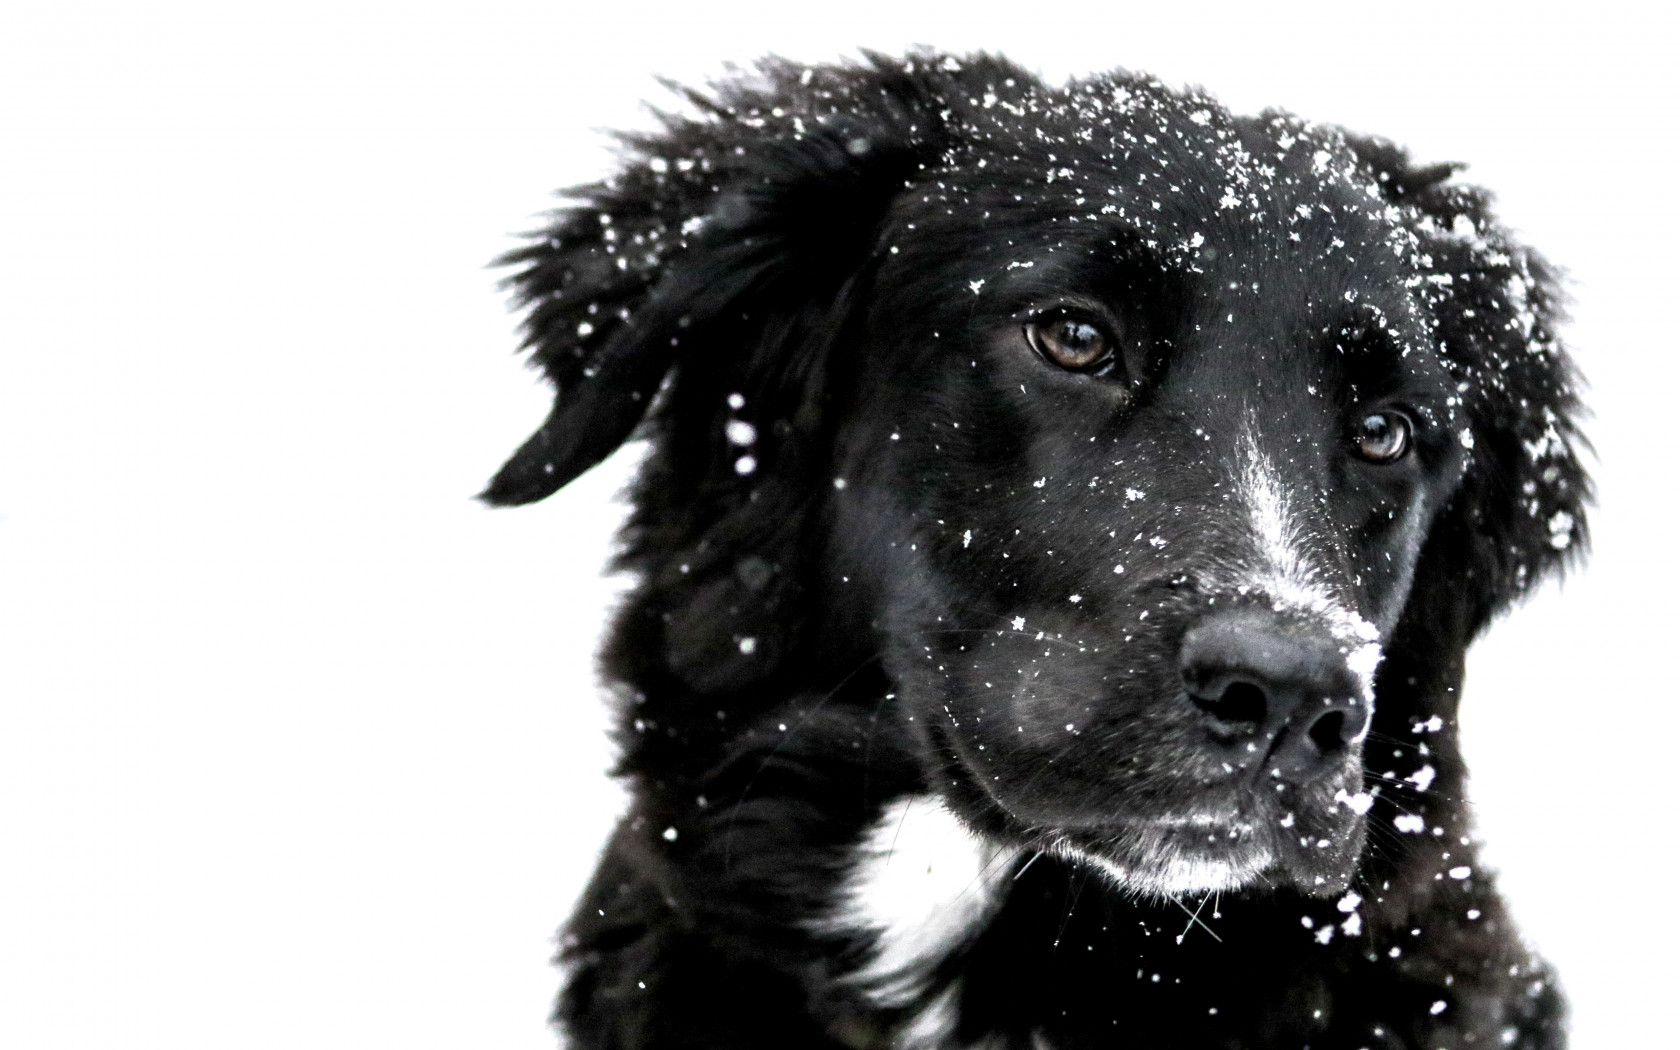 Snowing over the cute dog wallpaper 1680x1050